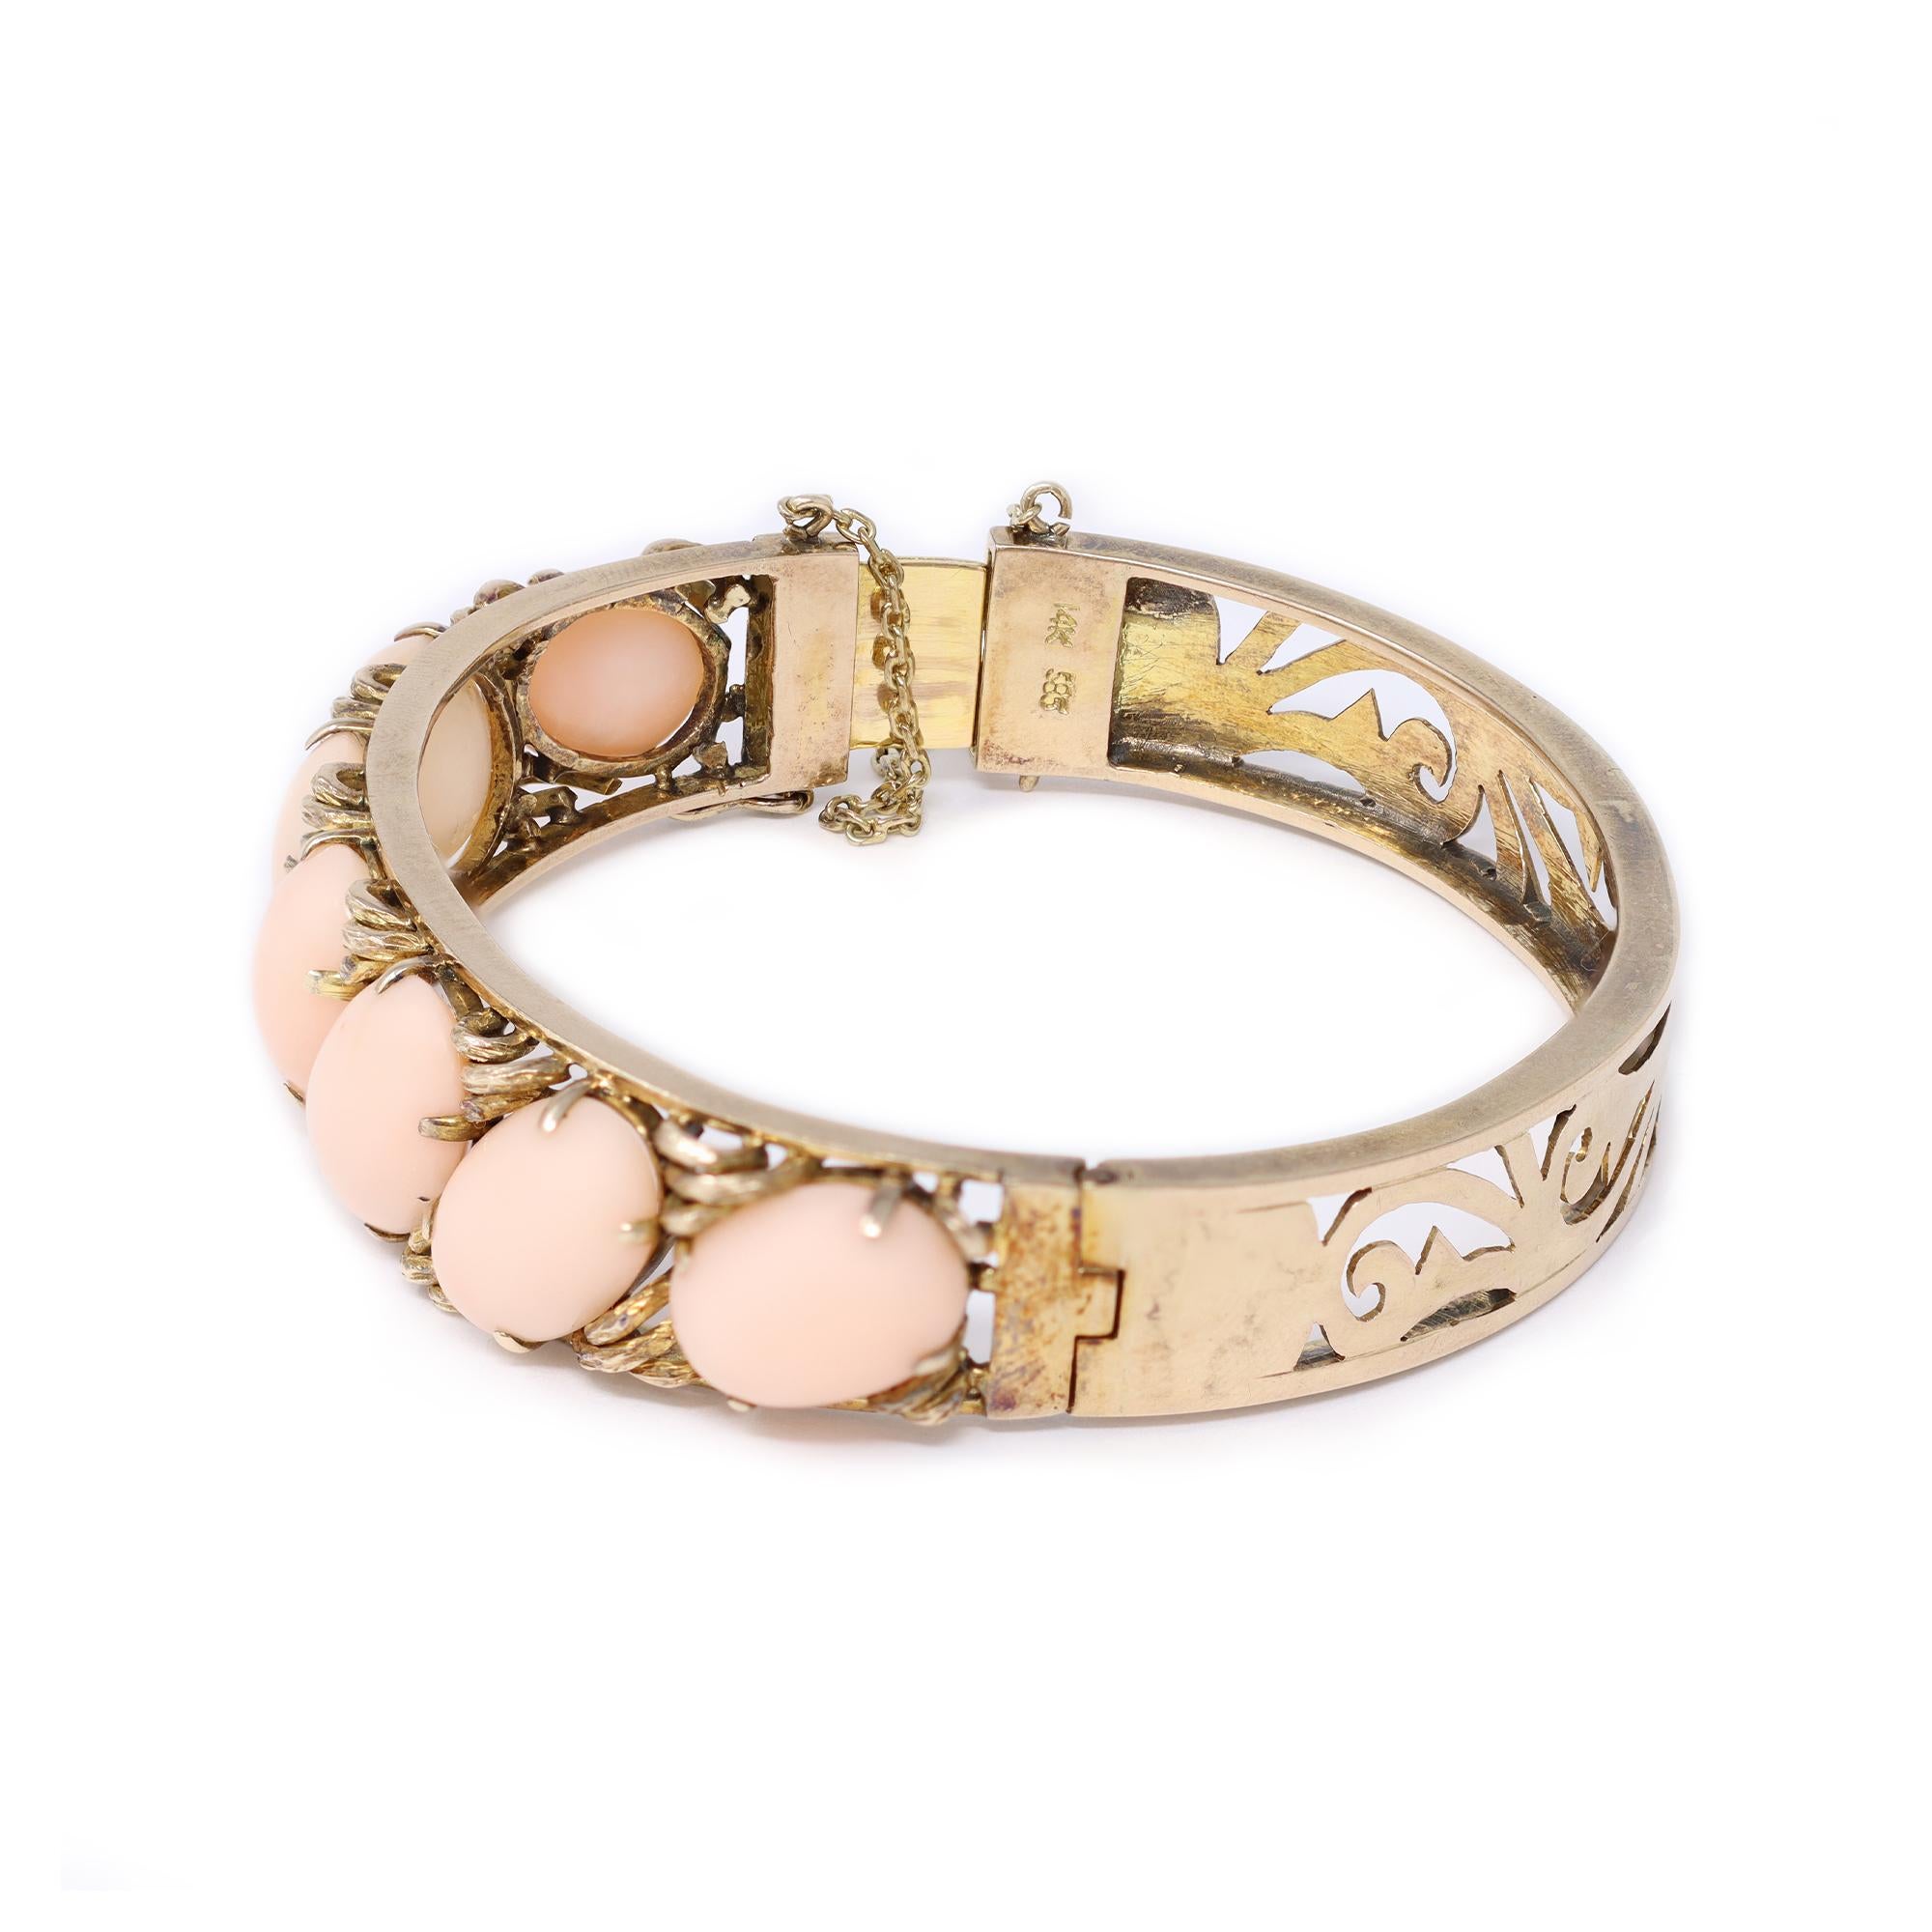 A lovely bangle from the Victorian era circa 1900 featuring matched Angel Skin oval coral cabochons. The hand made bangle bracelet is set in 14 karat rose gold and displays the normal oxydation of an antique piece. The coral cabochons are very even